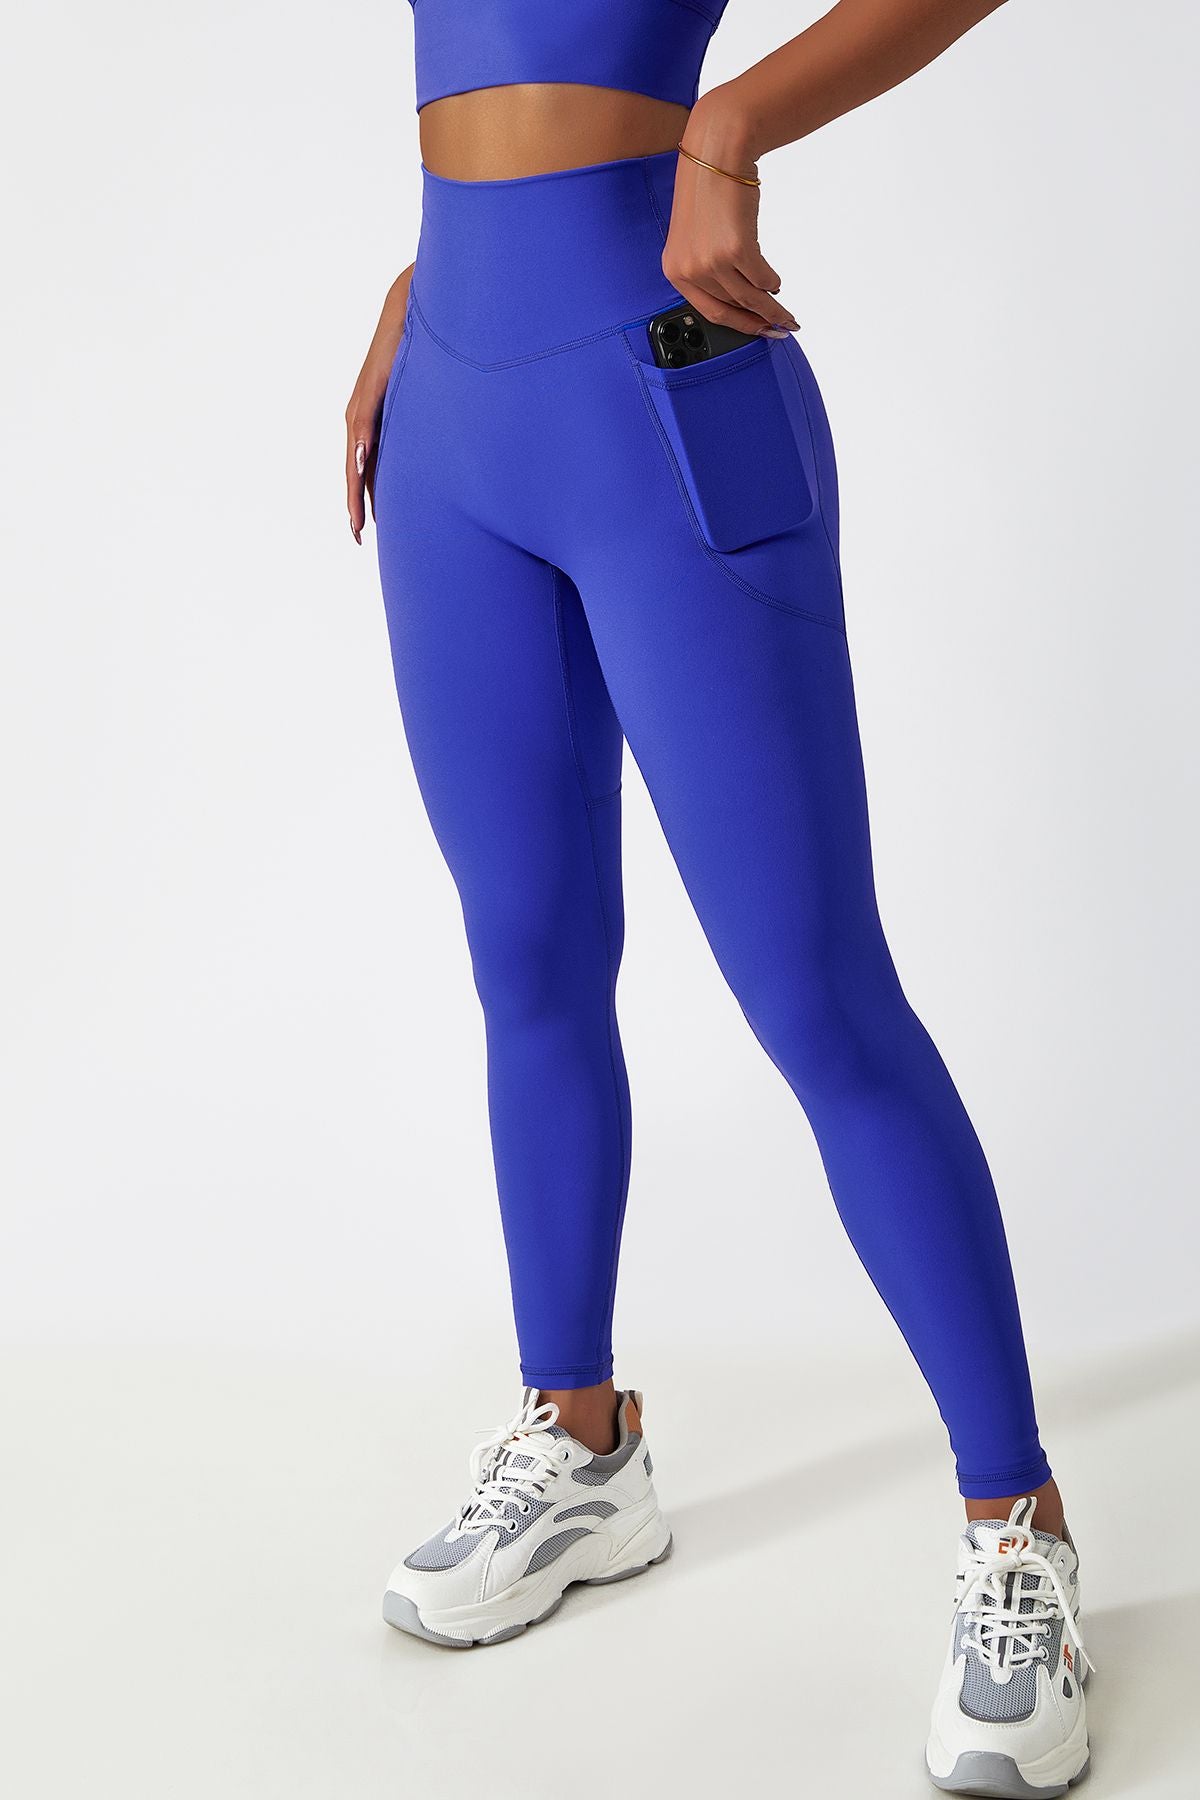 SKY BLUE HIGH WAISTED V-CUT TUMMY CONTROL LEGGINGS WITH TWO SIDE POC –  JOVIERFIT ATHLEISURE BRAND